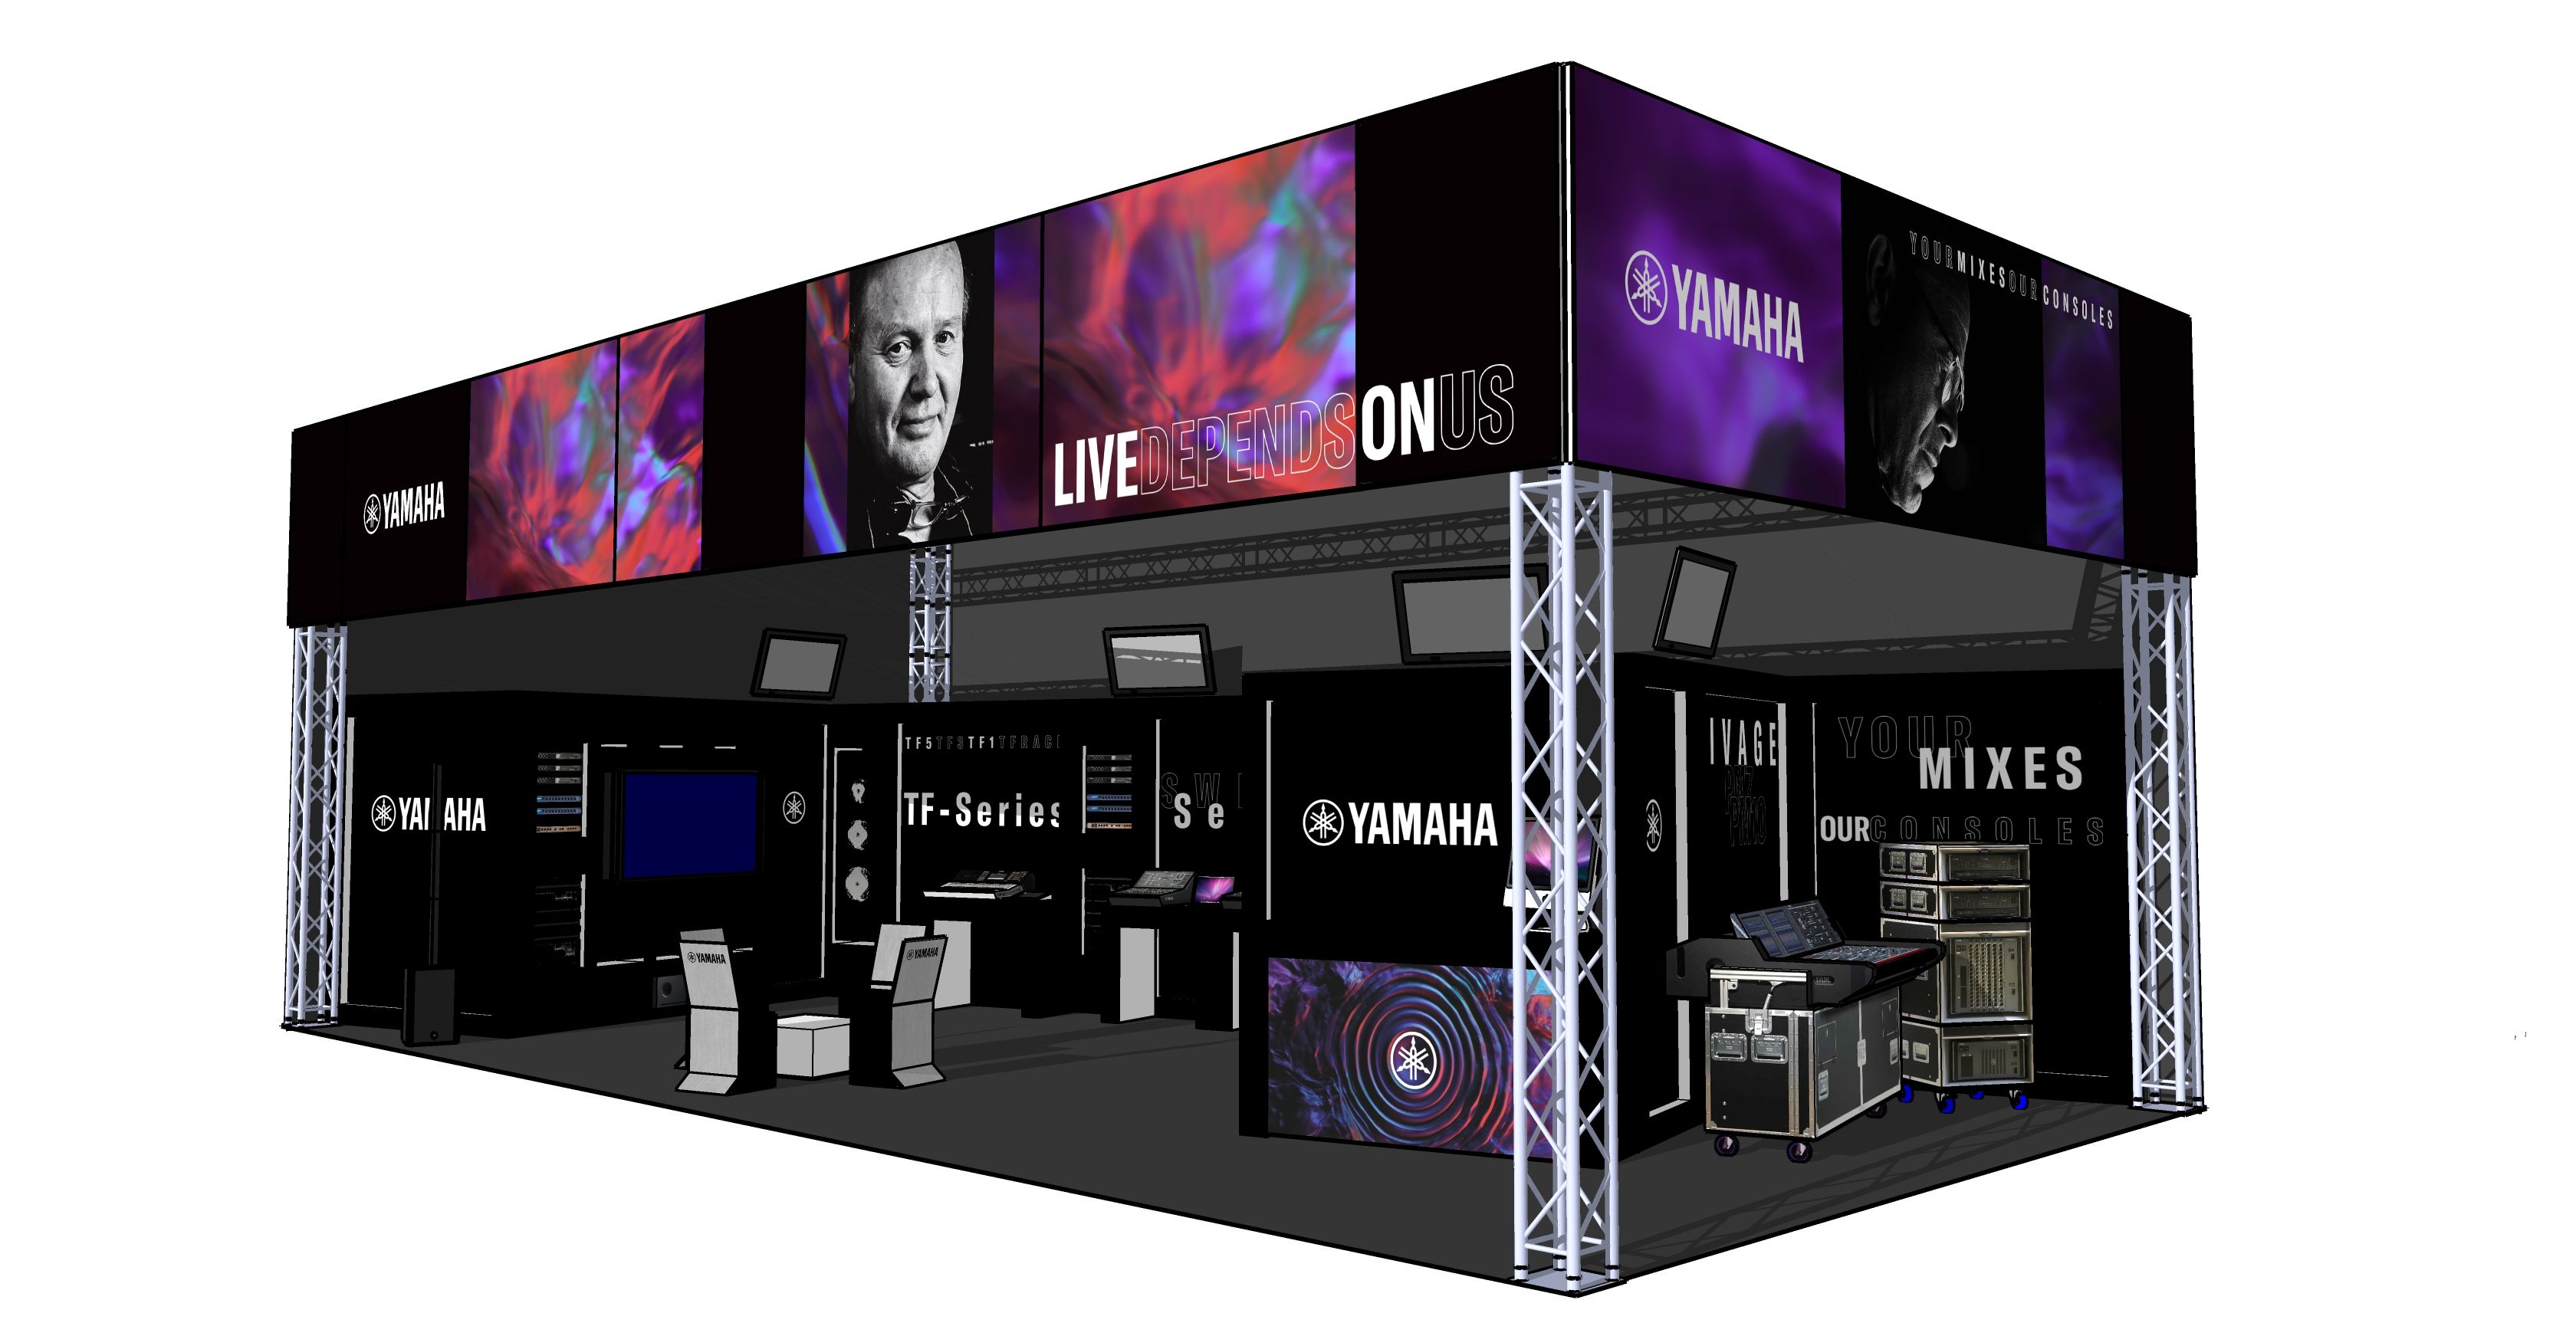 Held every two years at the Rotterdam Ahoy, Cue is the biggest and most important trade show for events, installation and entertainment technology in the Benelux countries. The 2020 show sees Yamaha expanding its presence with a series of seminars.